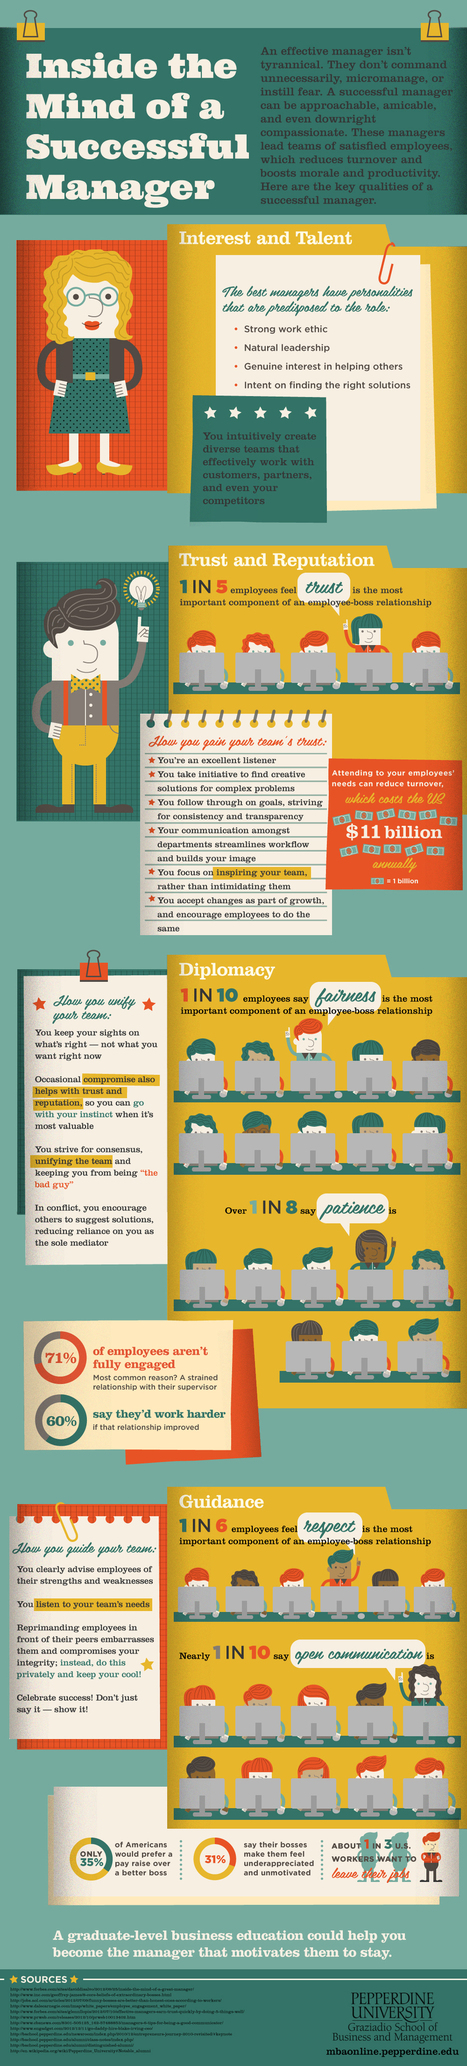 (Infographic) What Makes a Successful Manager? | 21st Century Learning and Teaching | Scoop.it